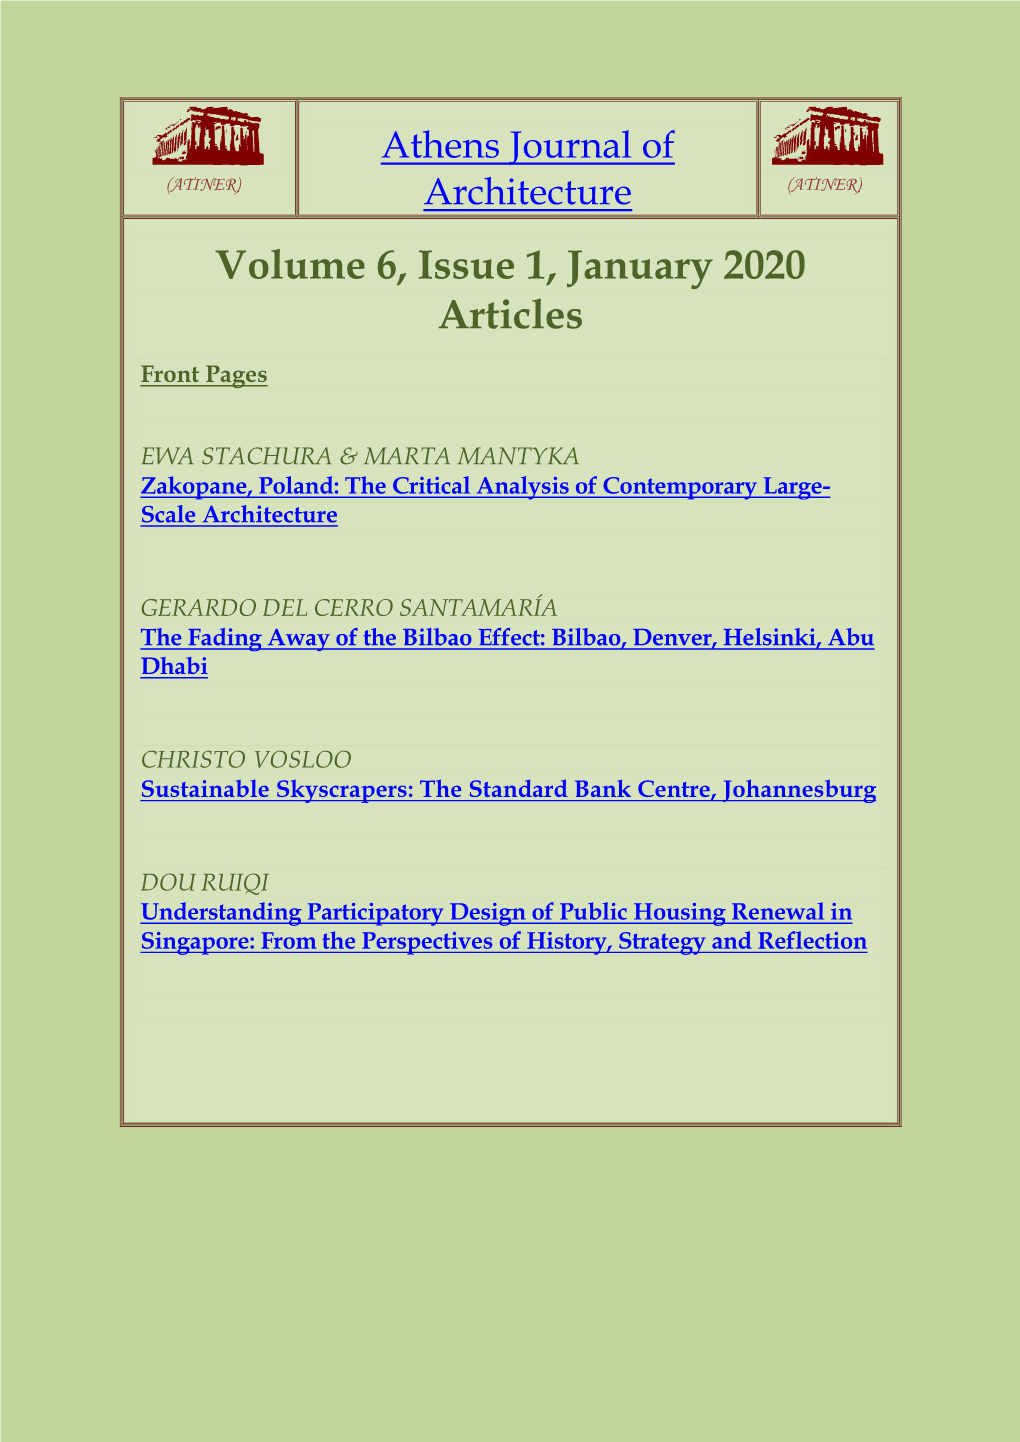 Volume 6, Issue 1, January 2020 Articles